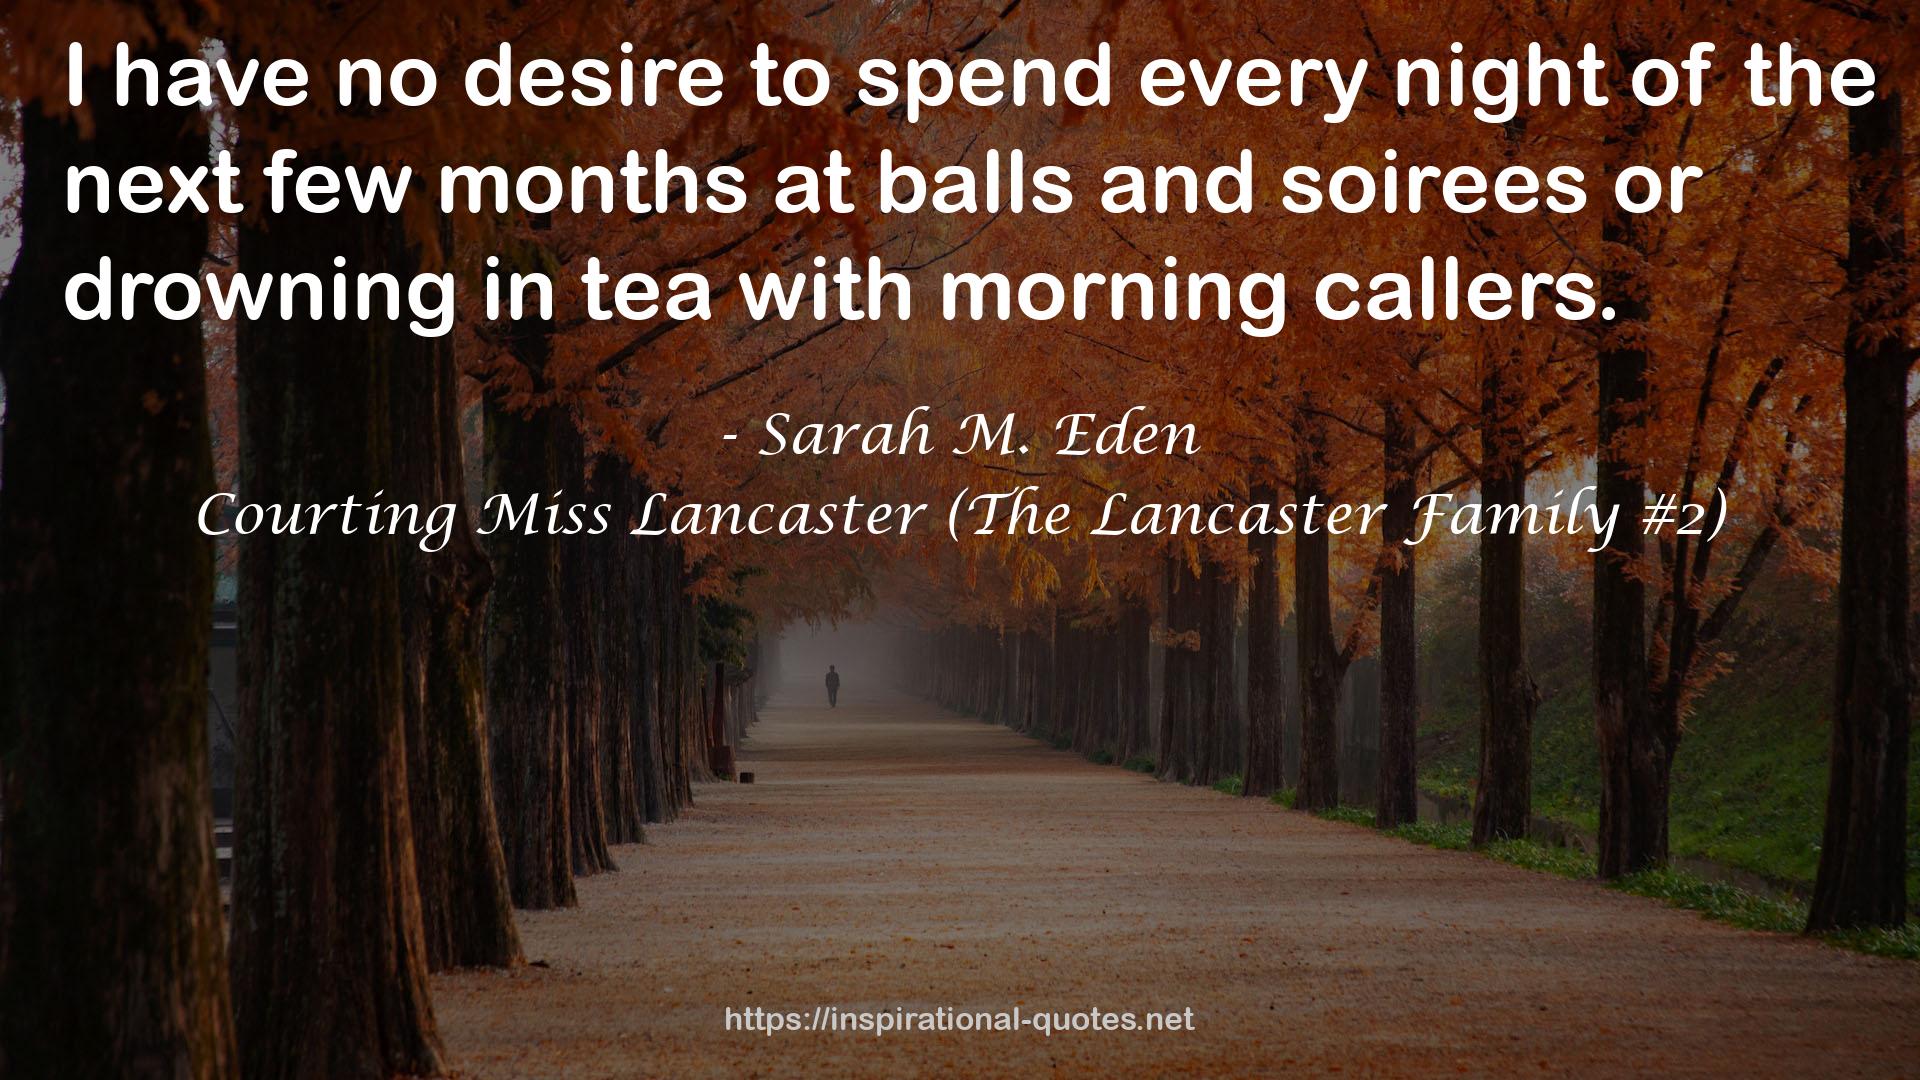 Courting Miss Lancaster (The Lancaster Family #2) QUOTES